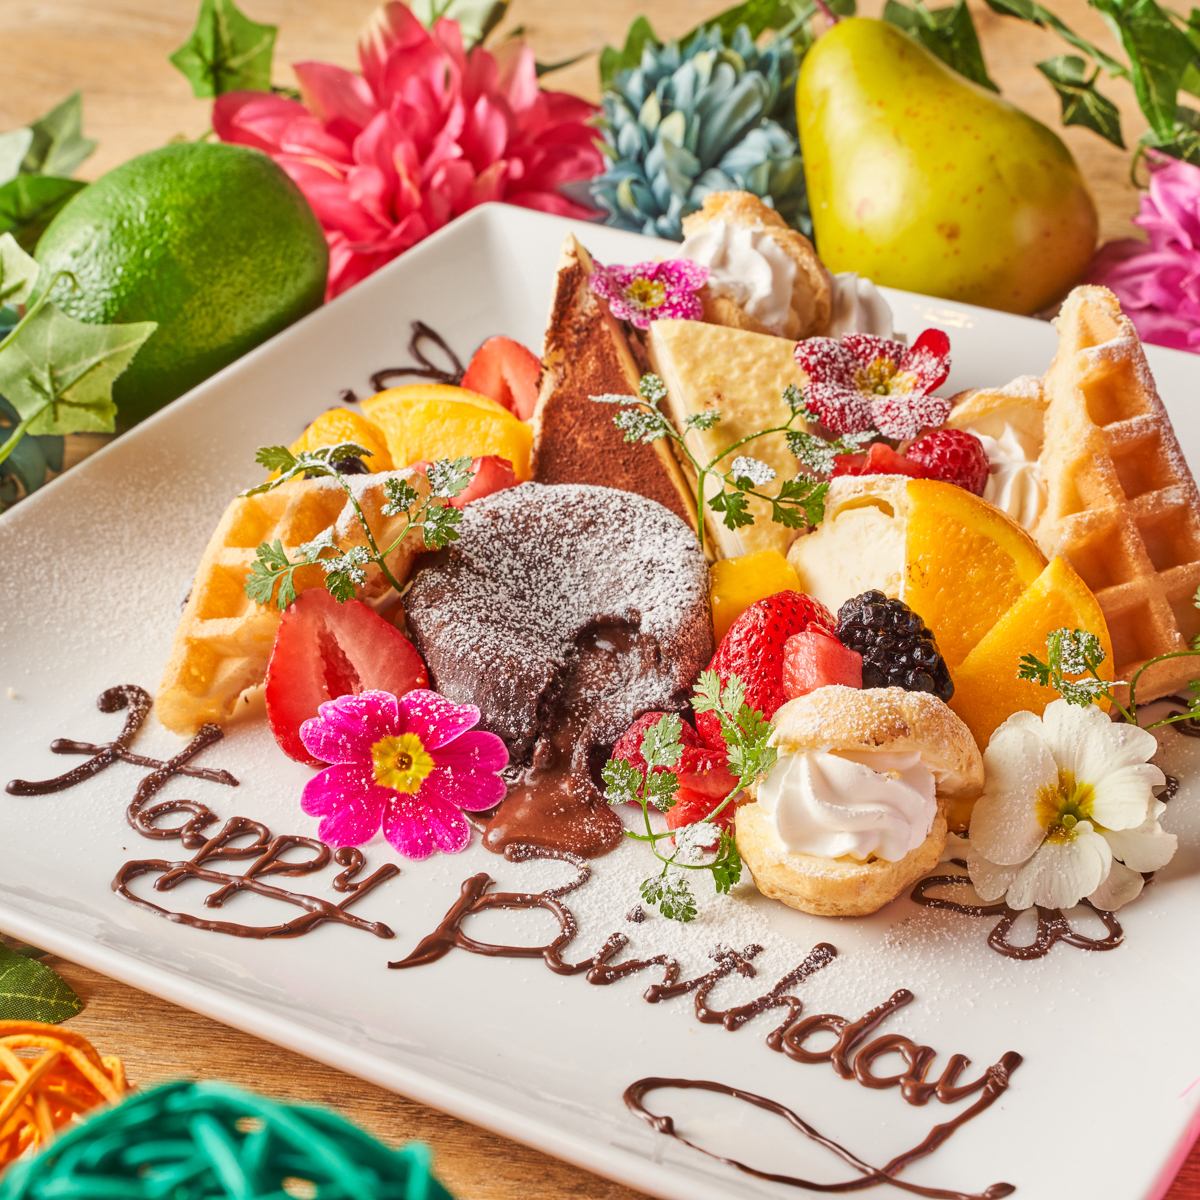 Celebrate your birthday or anniversary with a special dessert plate with your name on it♪